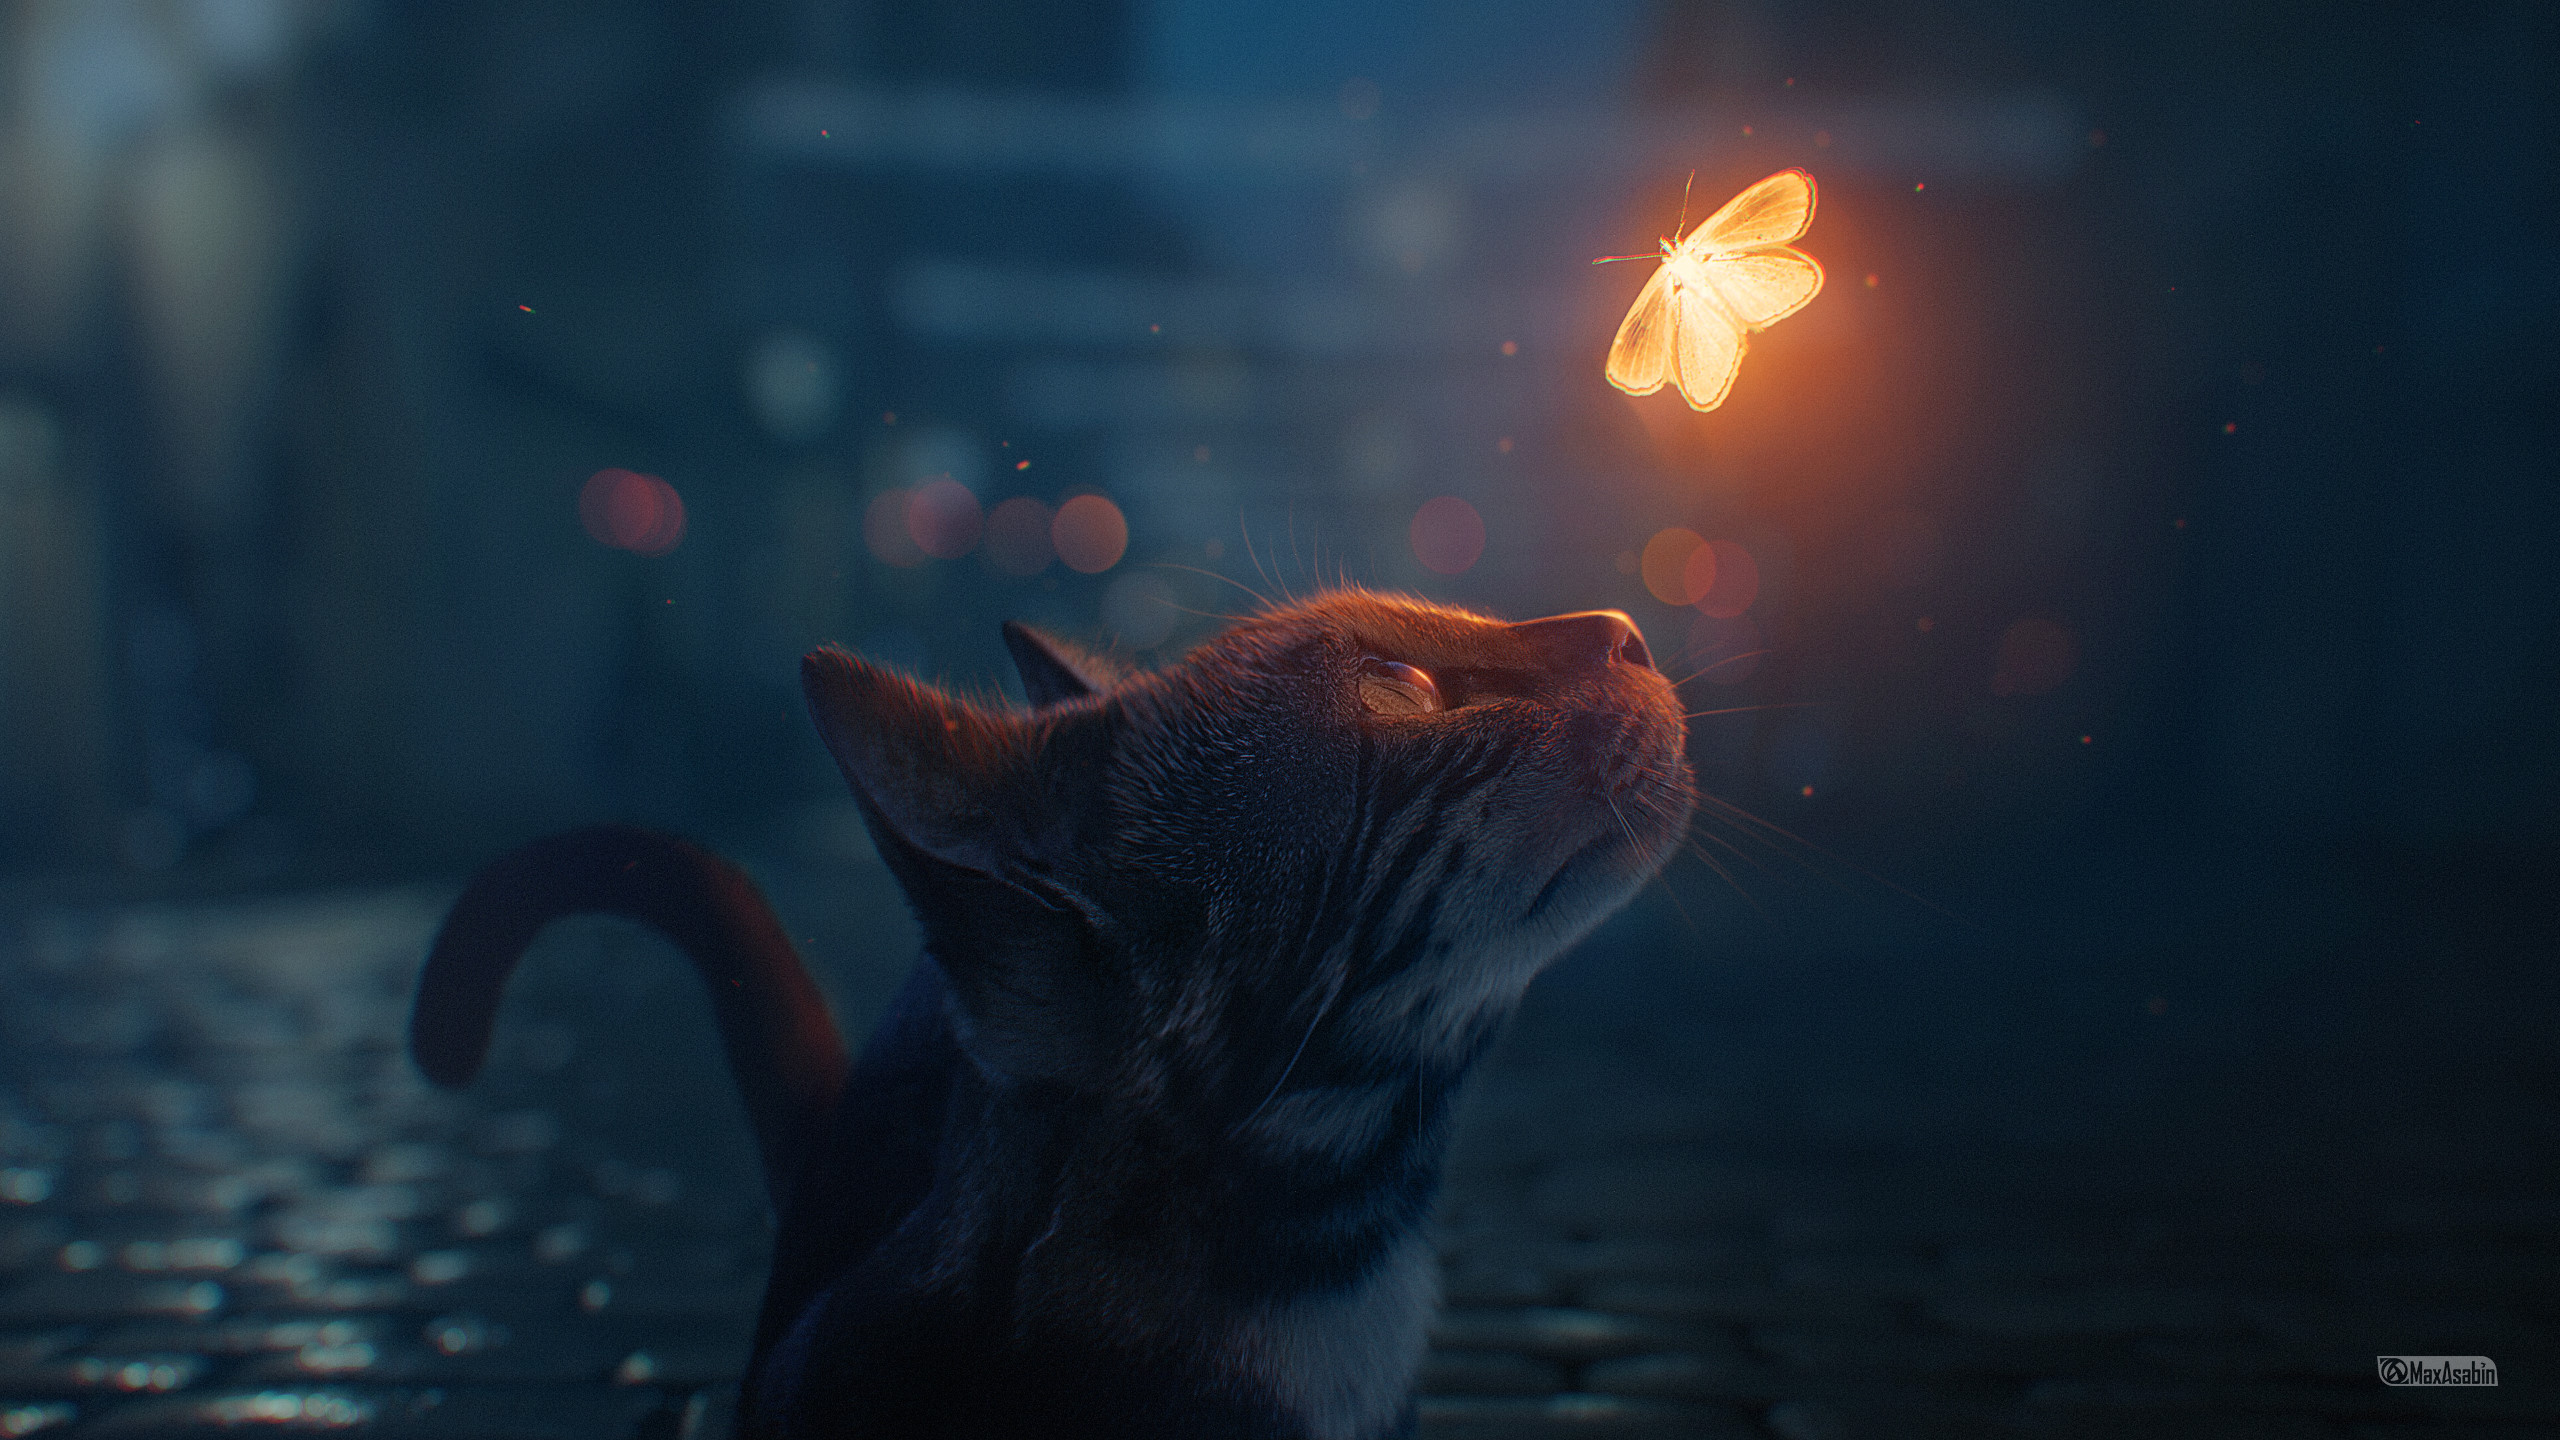 The cat and the butterfly wallpaper 2560x1440